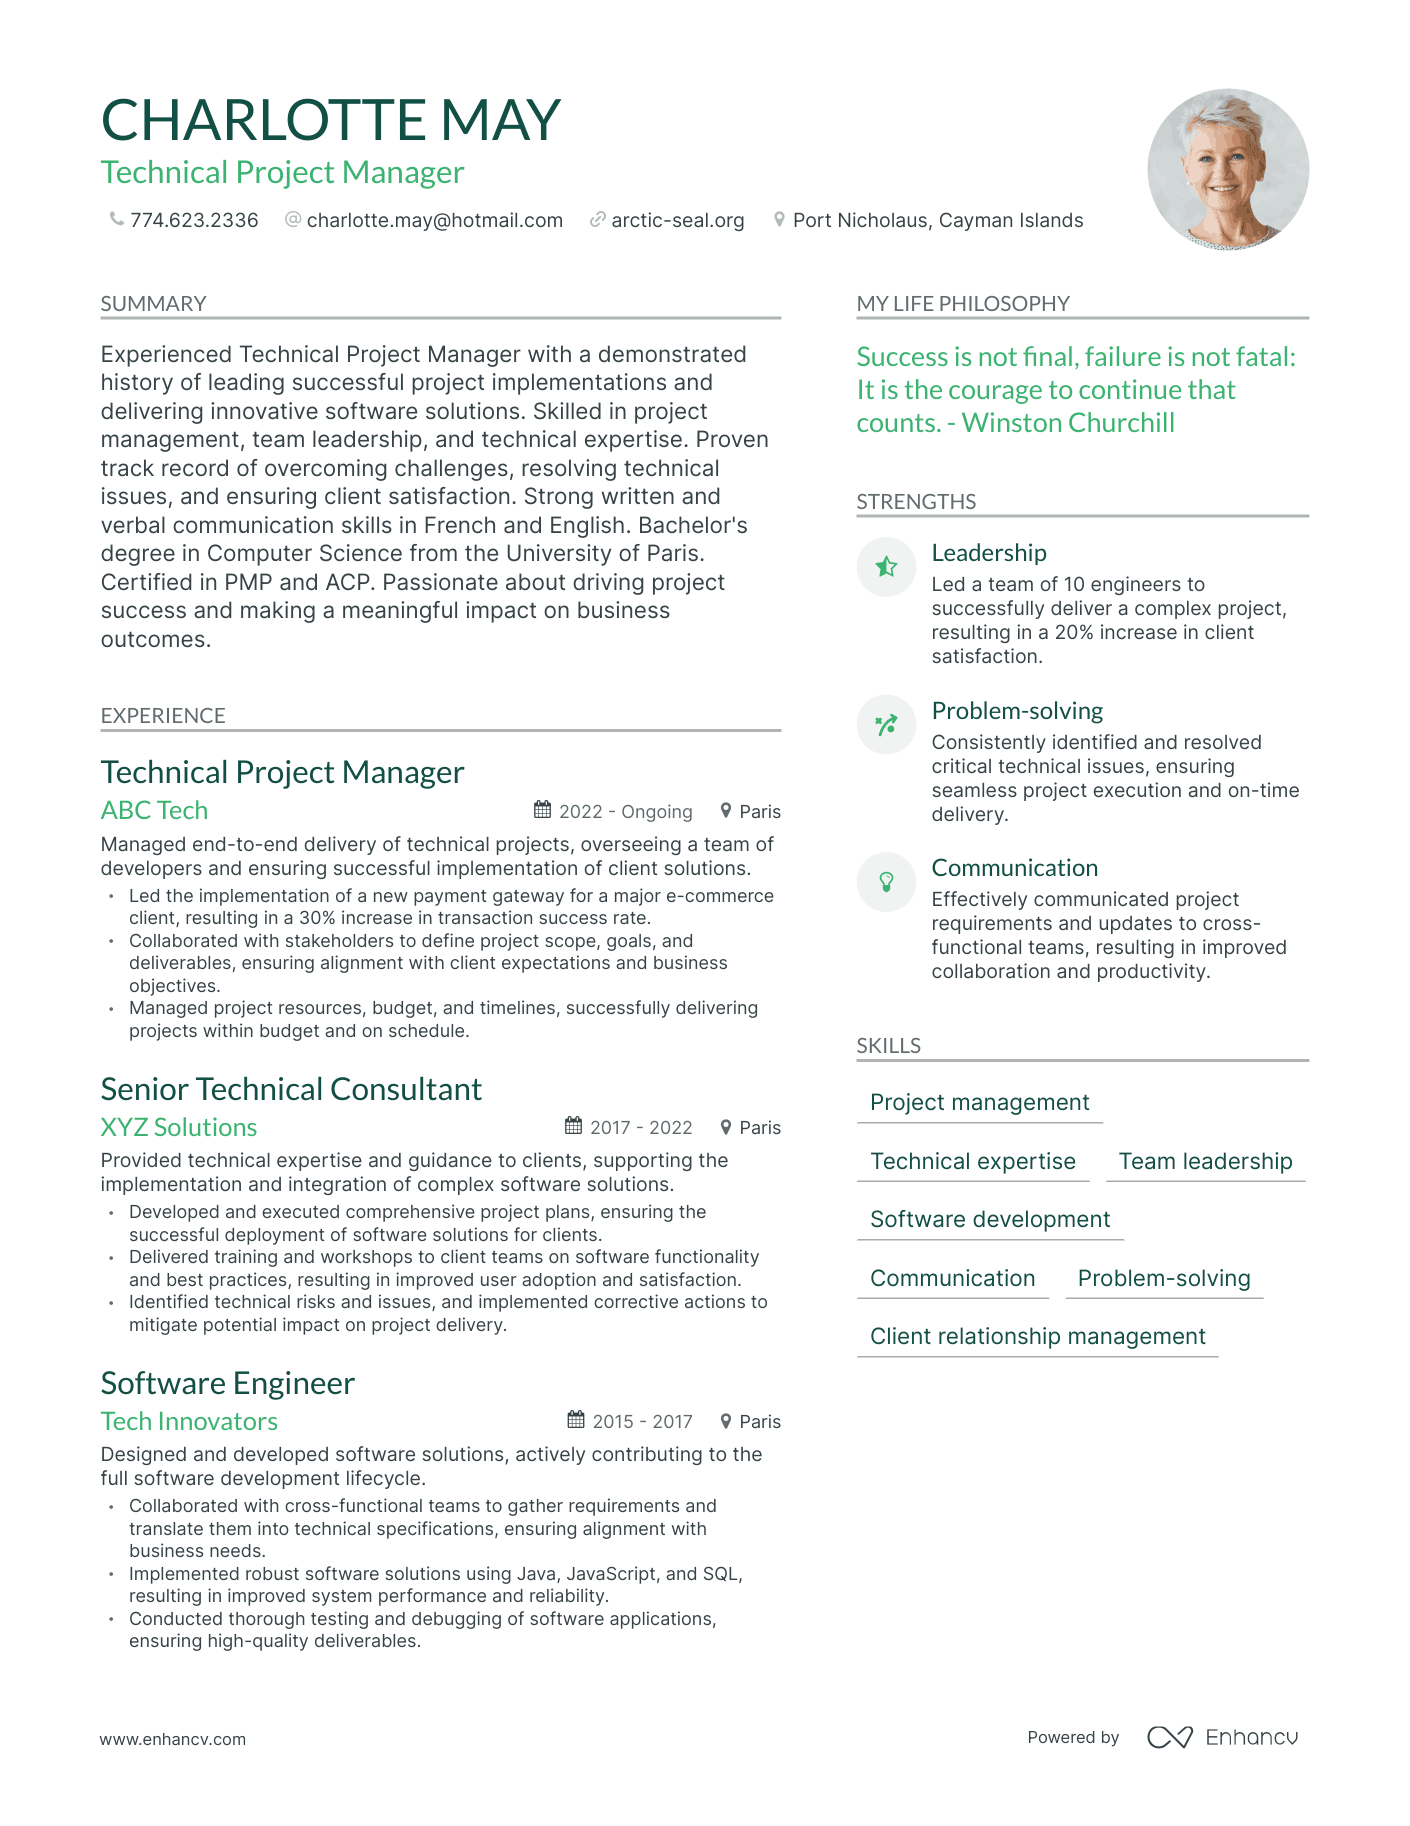 Technical Project Manager resume example